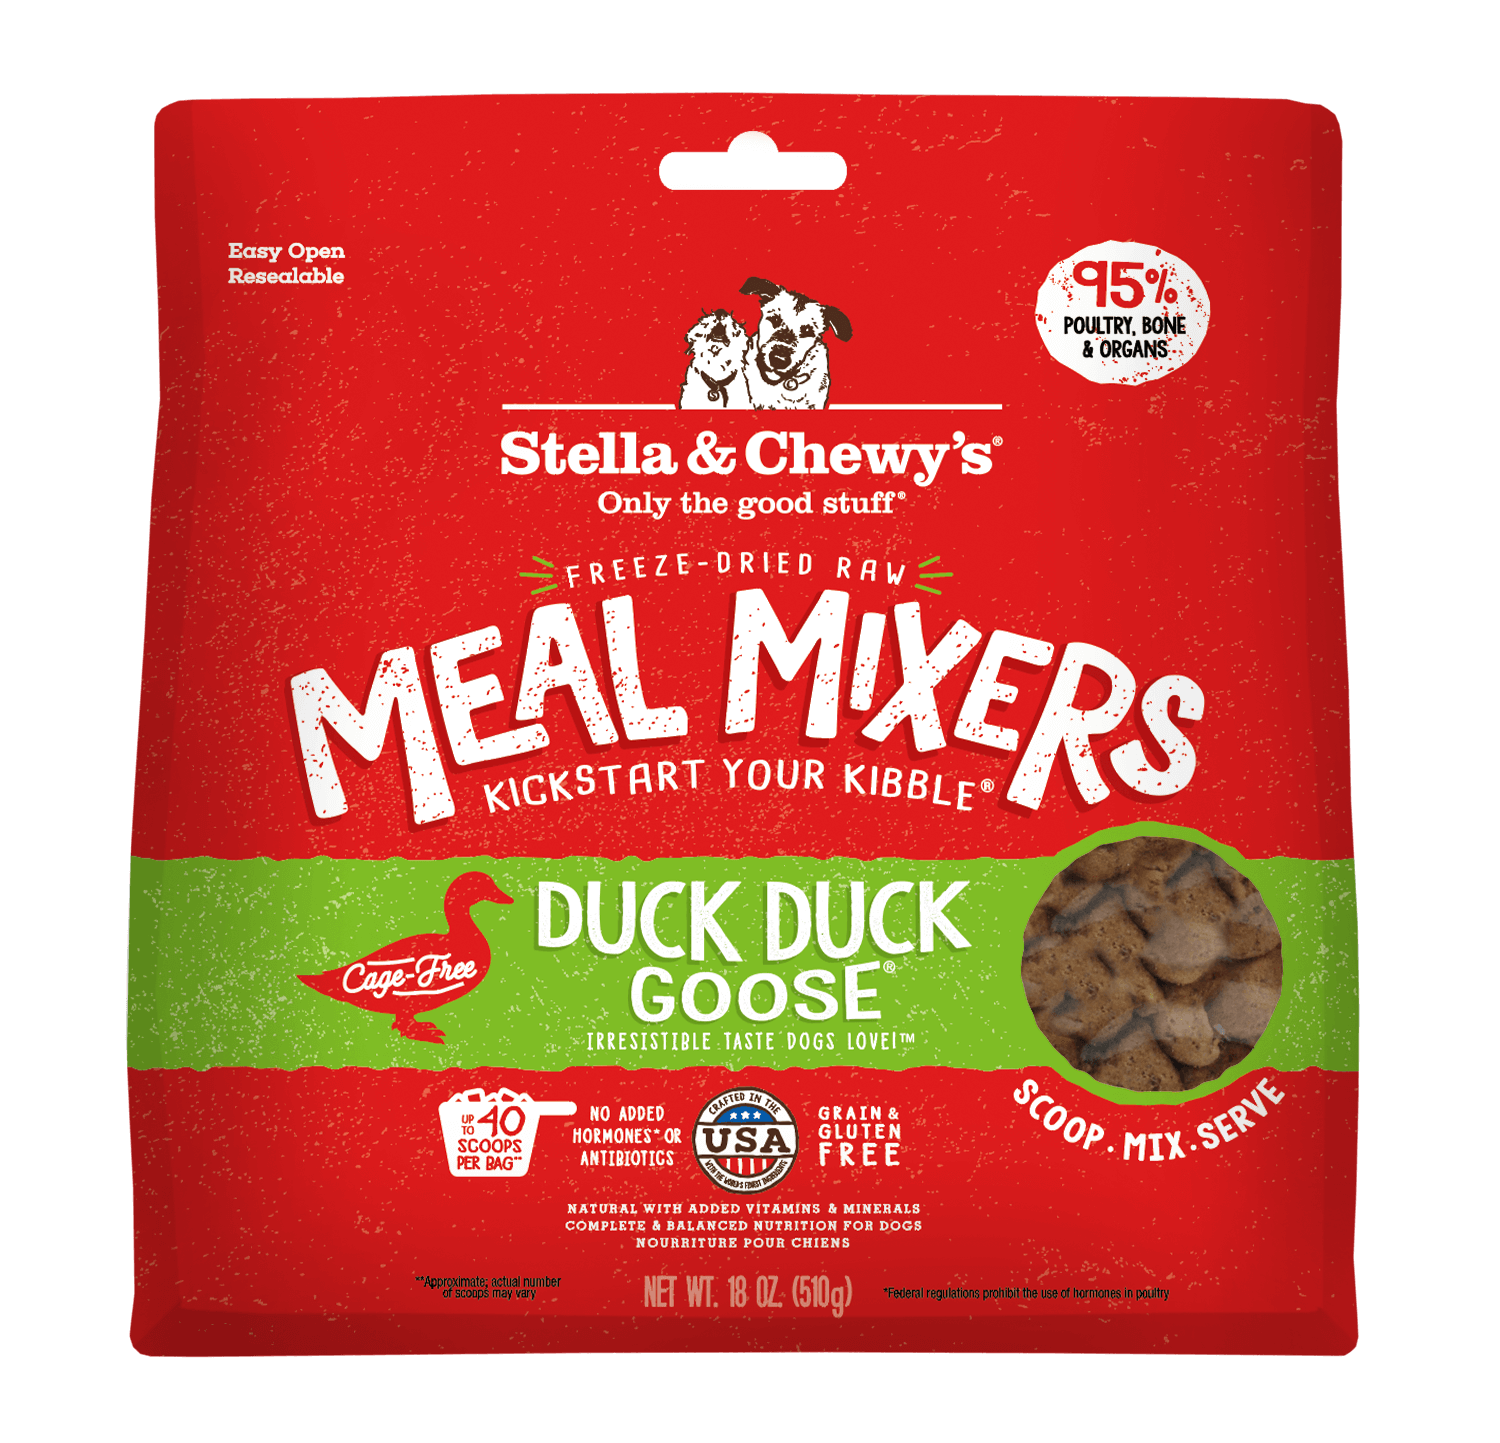 Stella & Chewy's Meal Mixer Duck